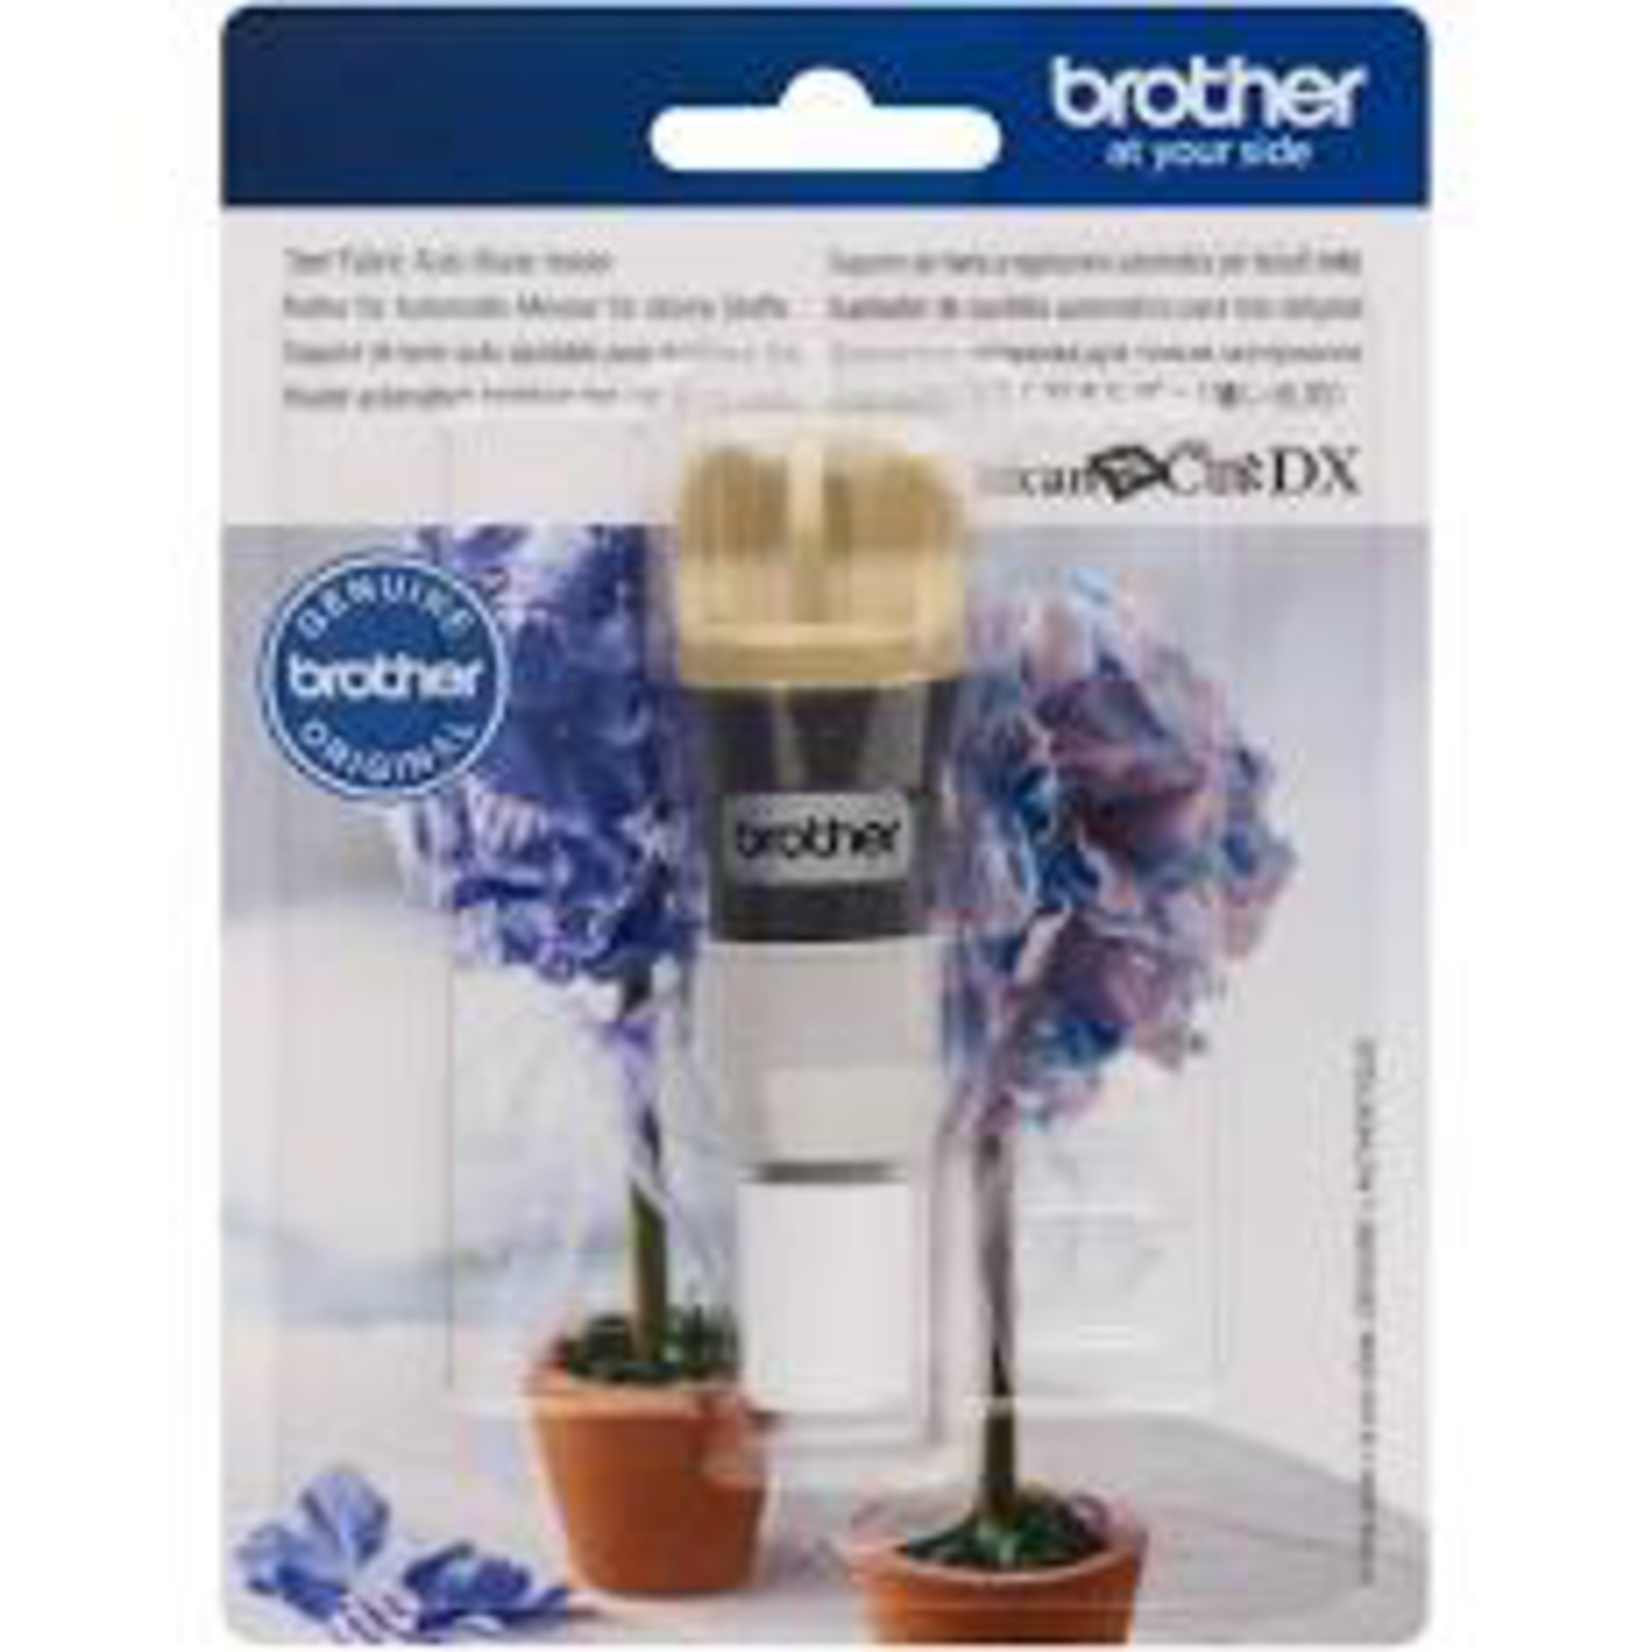 Brother Brother Thin Fabric Auto Blade Holder Scan n Cut DX